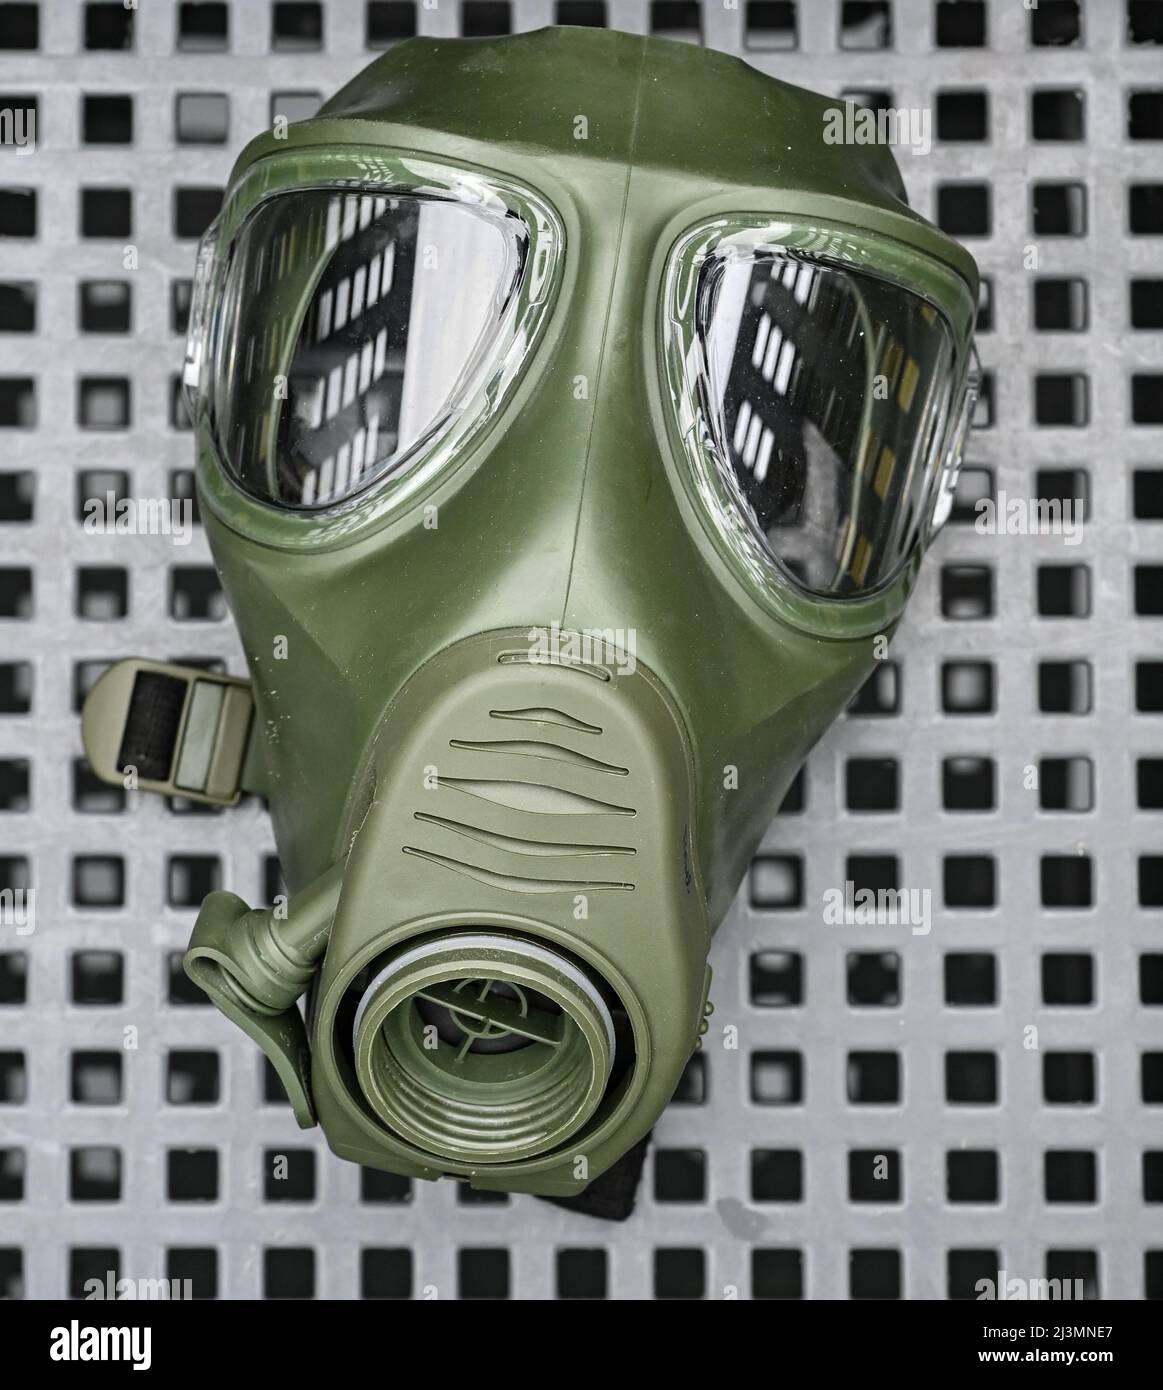 06 April 2022, Brandenburg, Strausberg: A Bundeswehr gas mask lies in a  container on the sidelines of the ceremonial roll call for the  commissioning of NBC Defense Regiment 1 at Barnim Barracks.